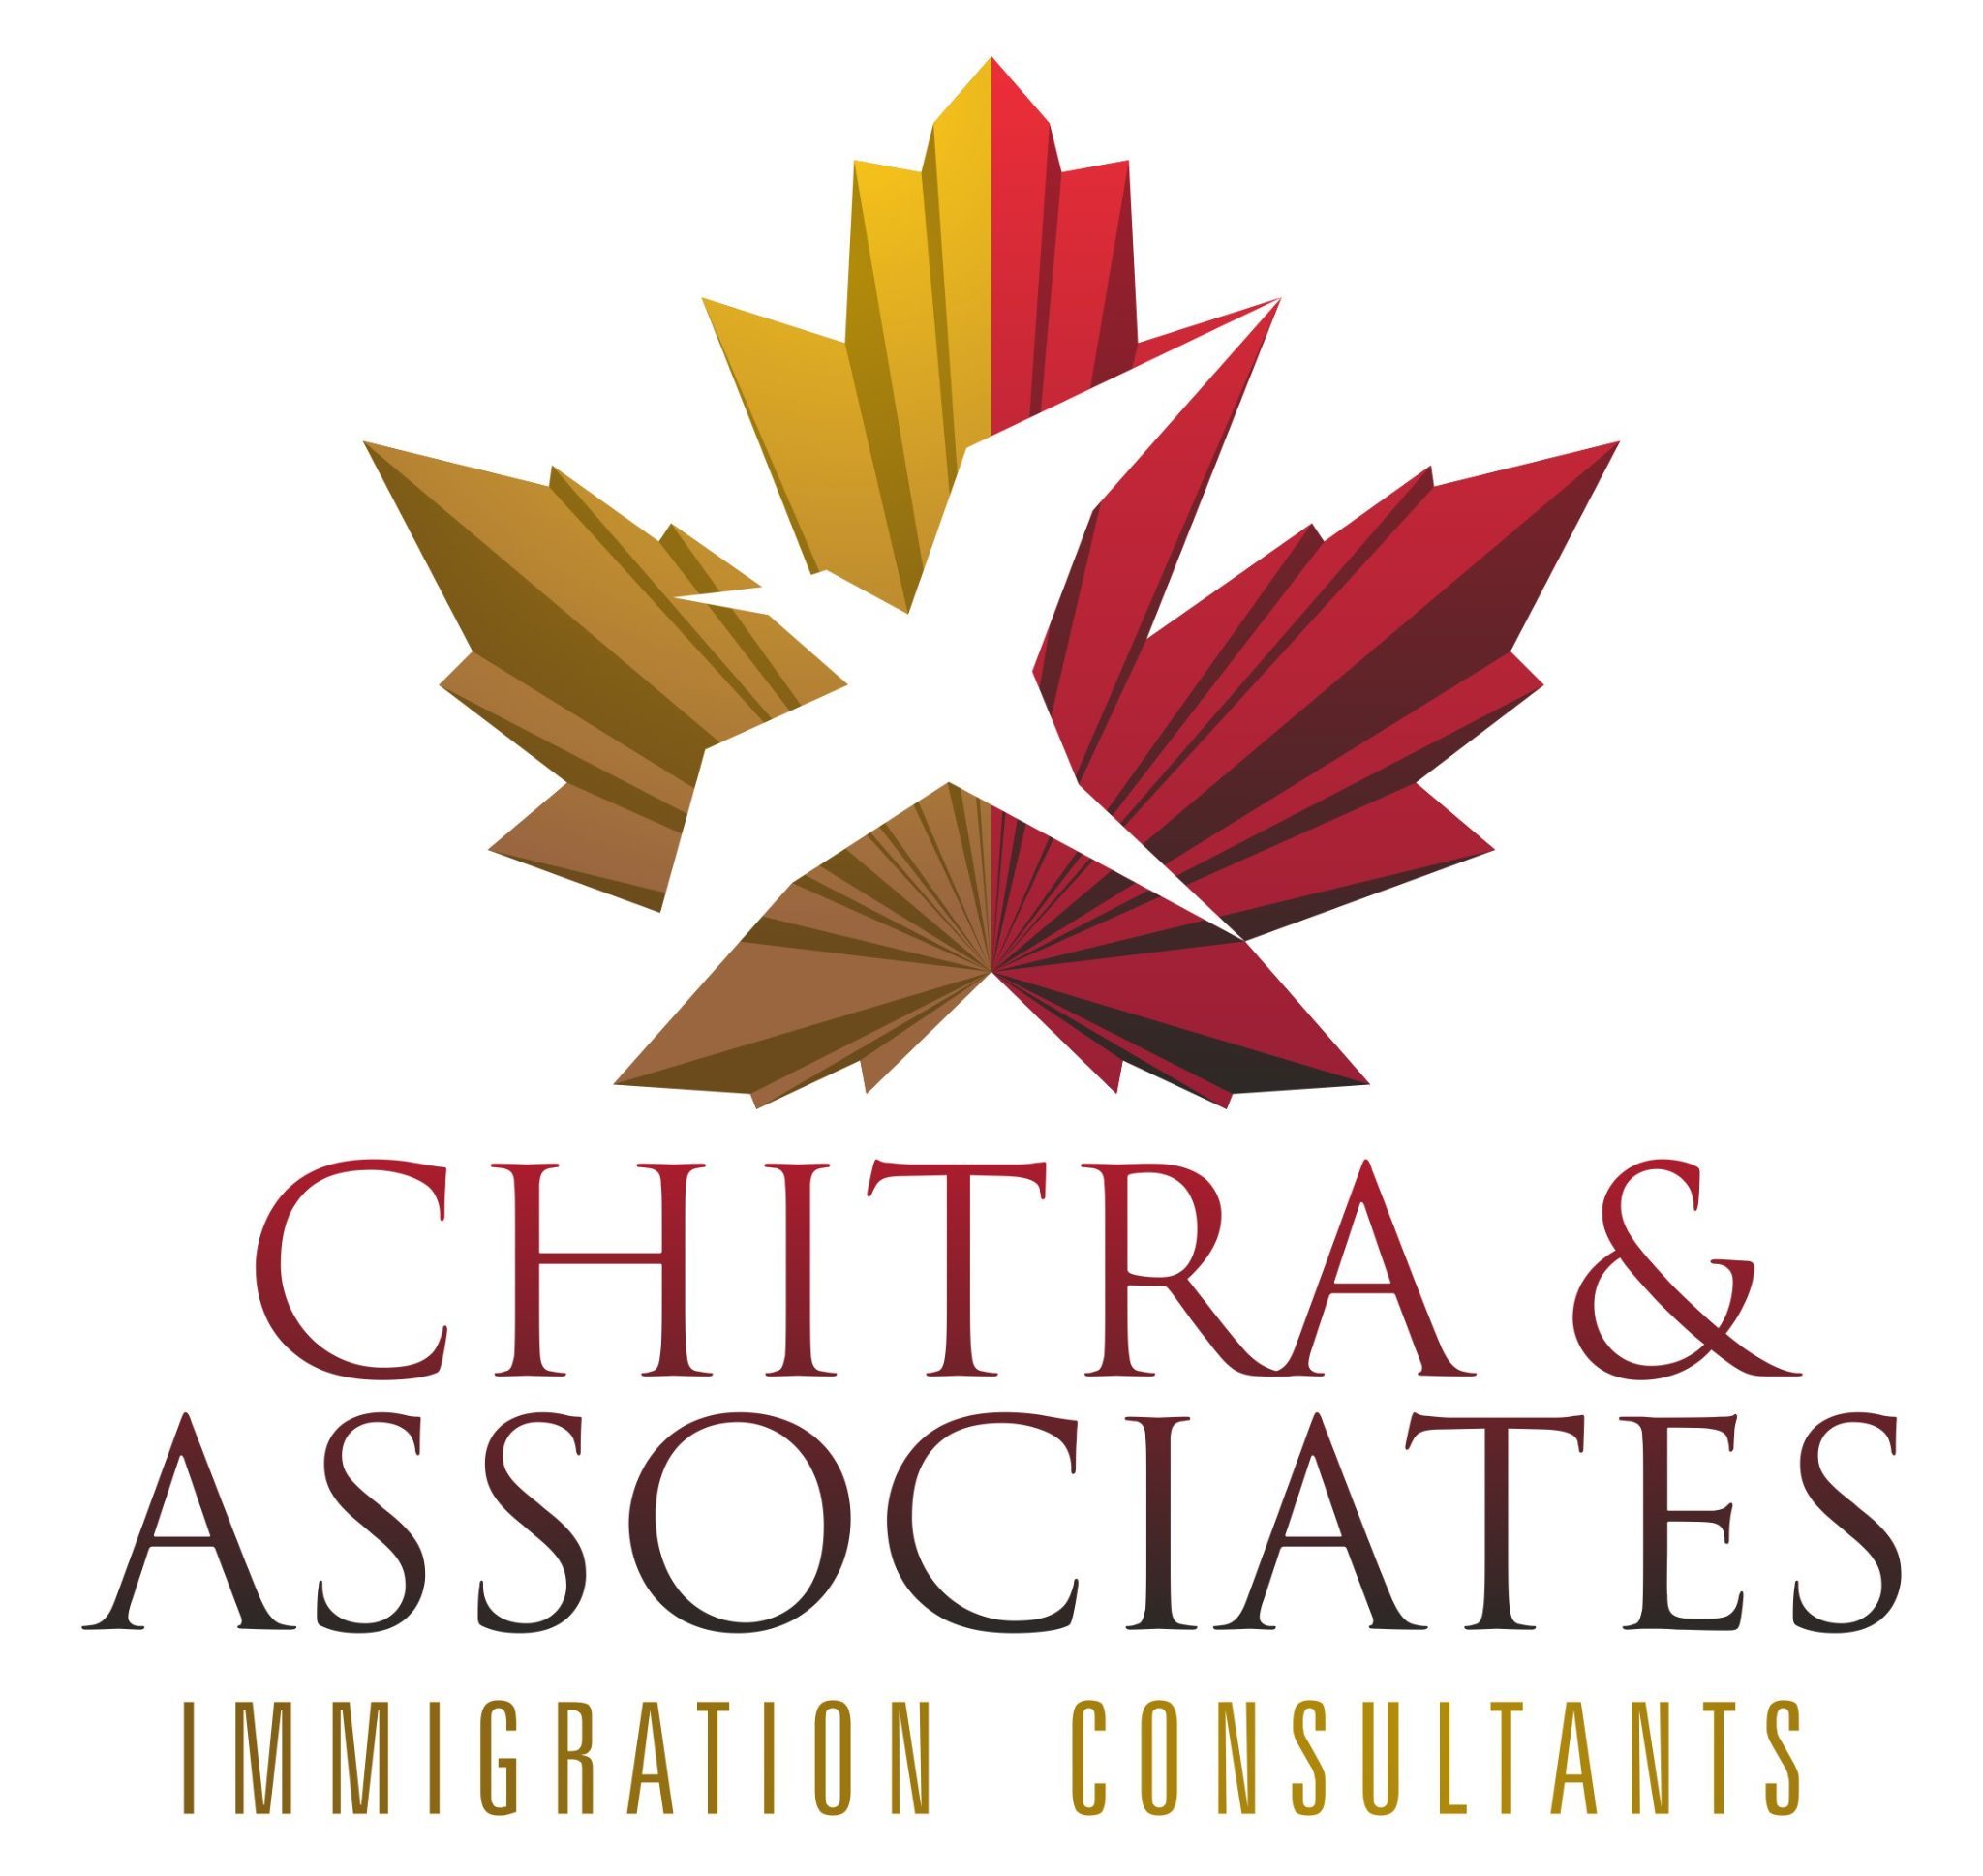 Regulated Canadian Immigration Consultants based in Vancouver, BC. 
👩🏻‍🔬Skilled immigration programs
💲Entrepreneur/Investor programs
🎓Study abroad services